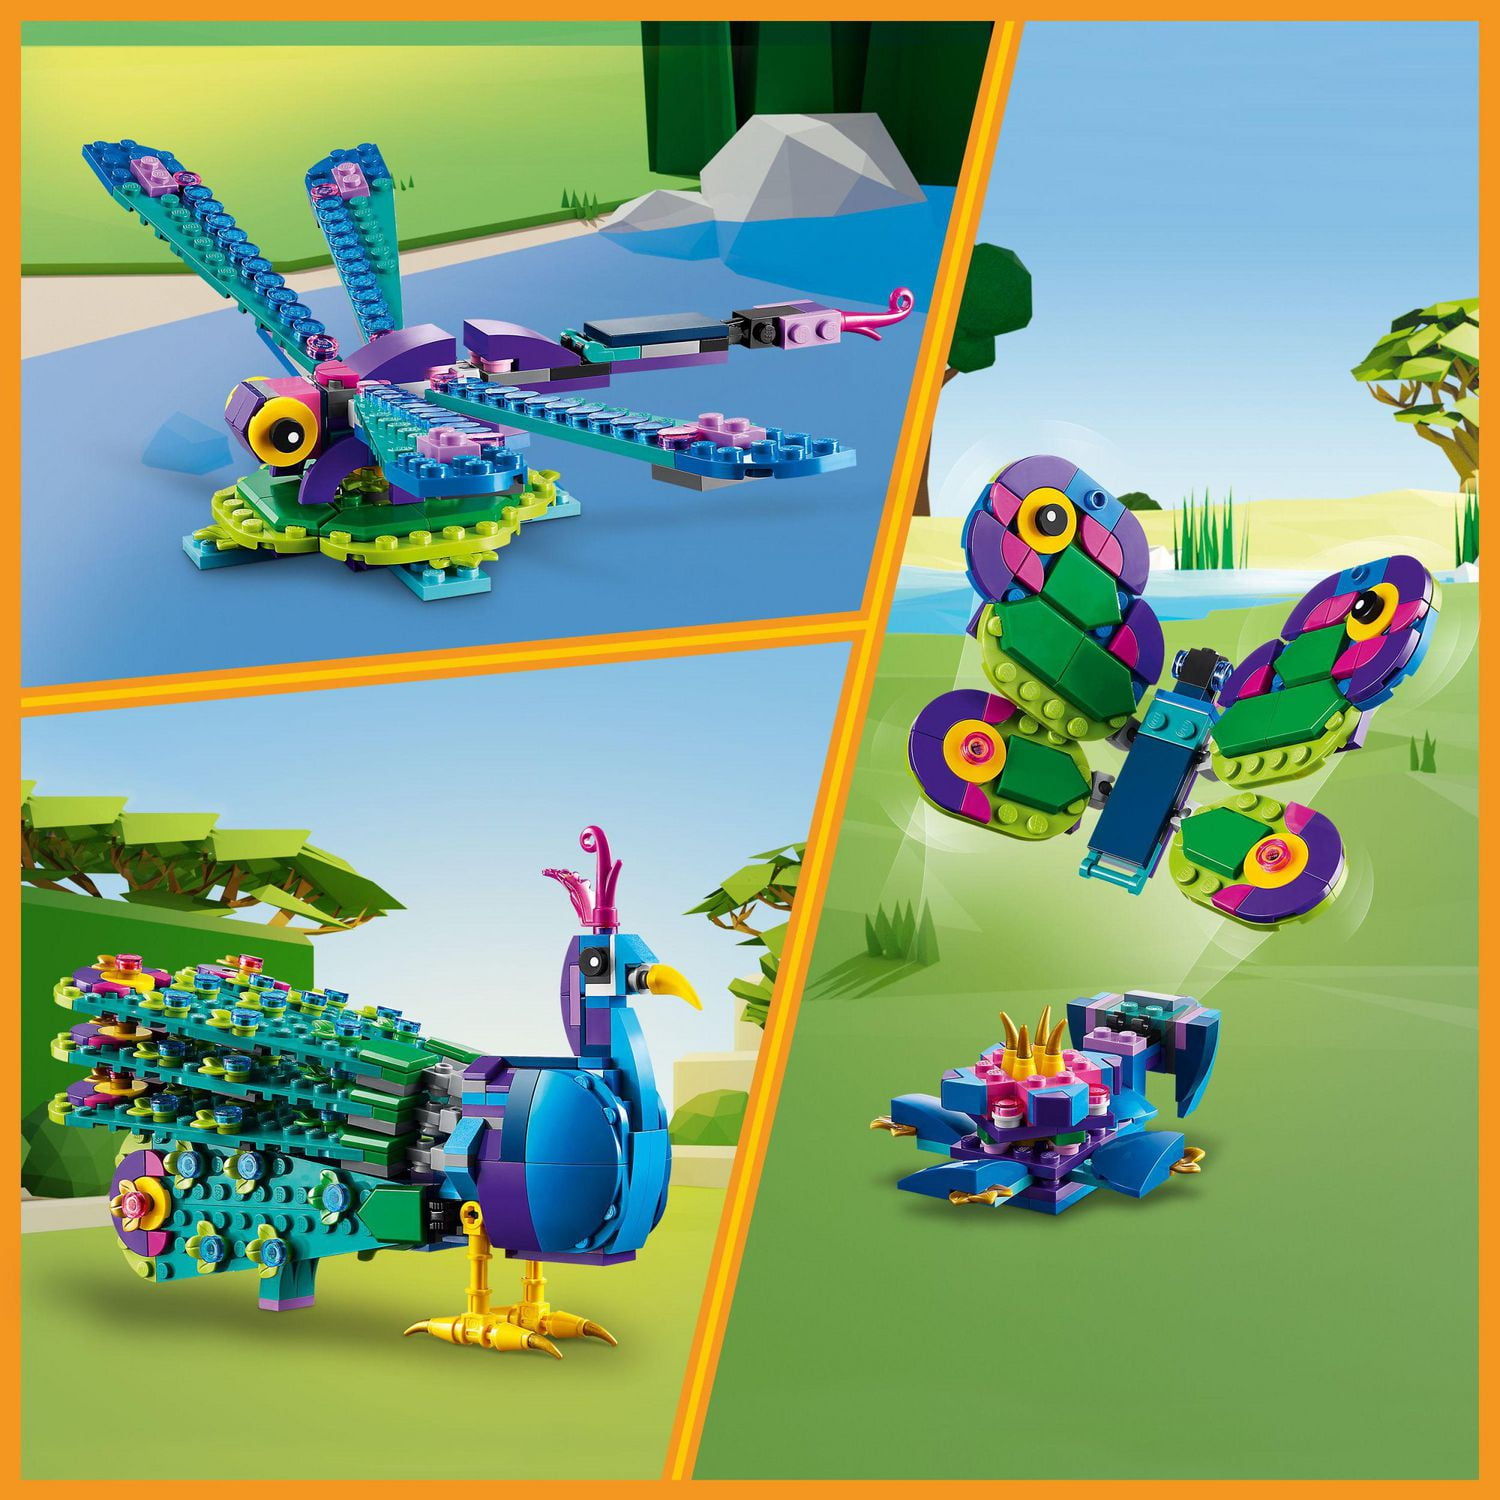 LEGO Creator 3 in 1 Exotic Peacock Toy, Transforms from Peacock to  Dragonfly to Butterfly Toy, Play-and-Display Gift Idea for Boys and Girls  Ages 7 Years Old and Up, Bird Toy, 31157